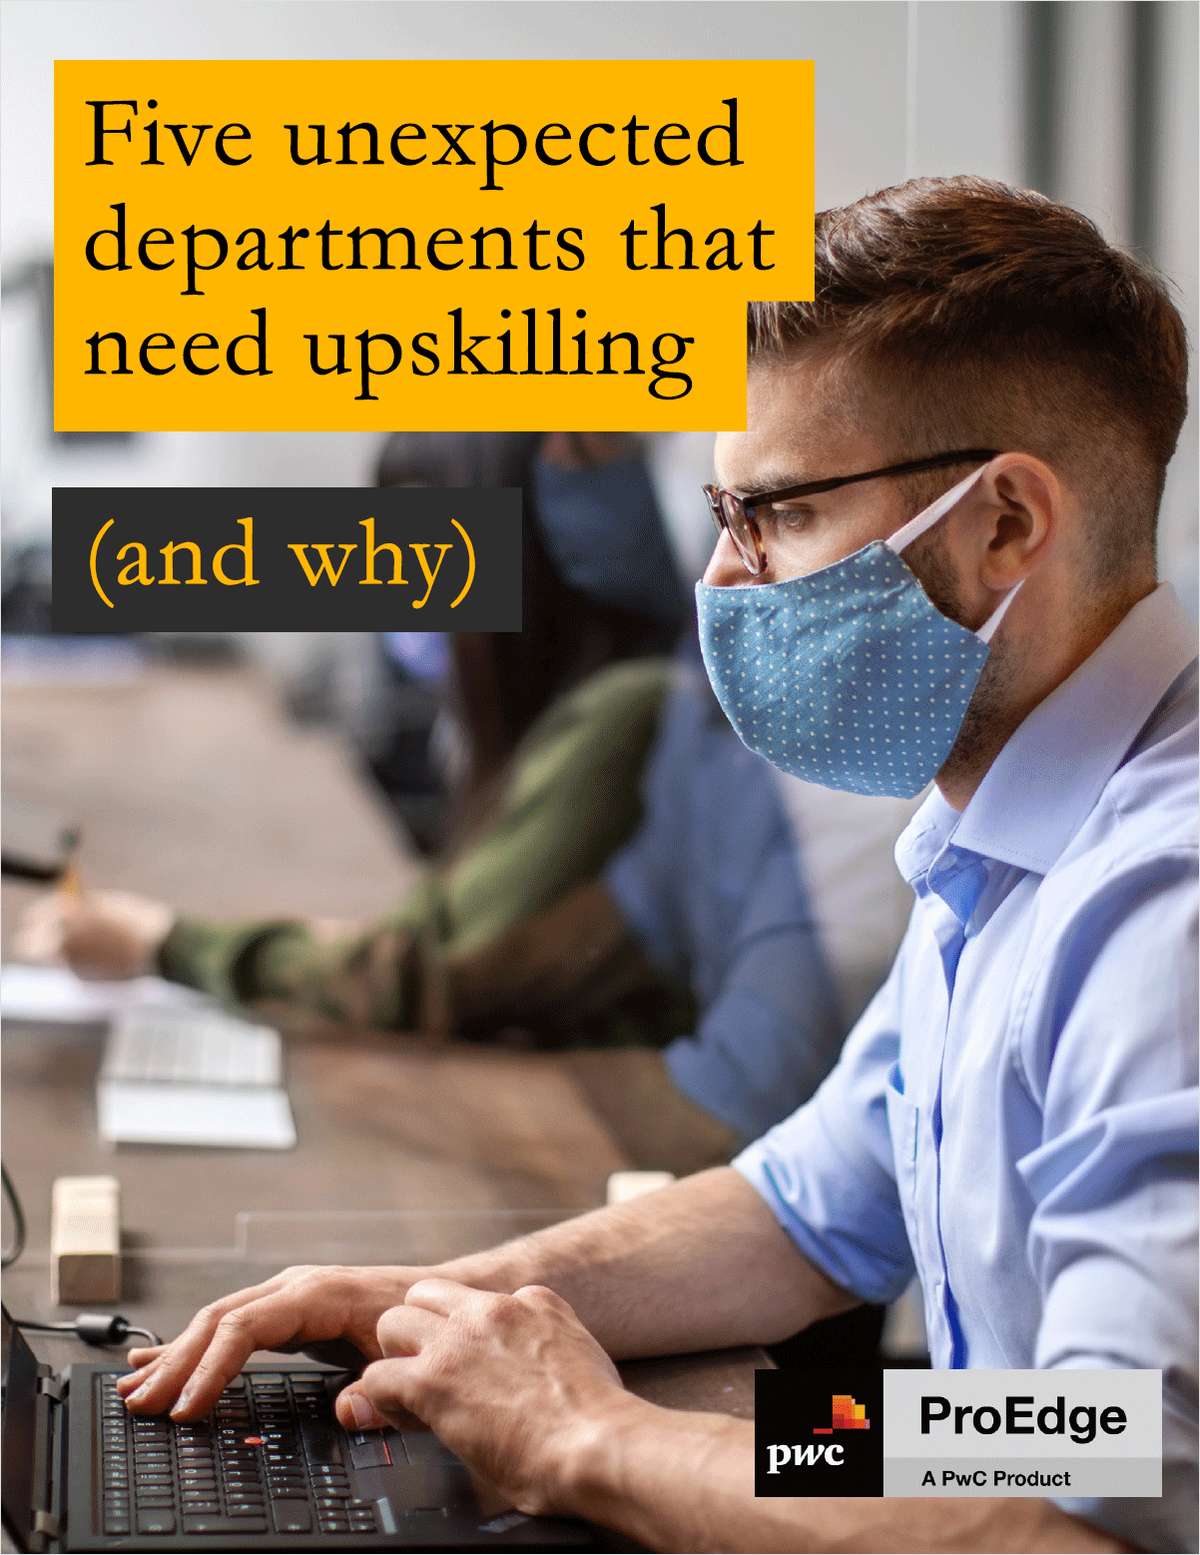 Five unexpected departments that need upskilling